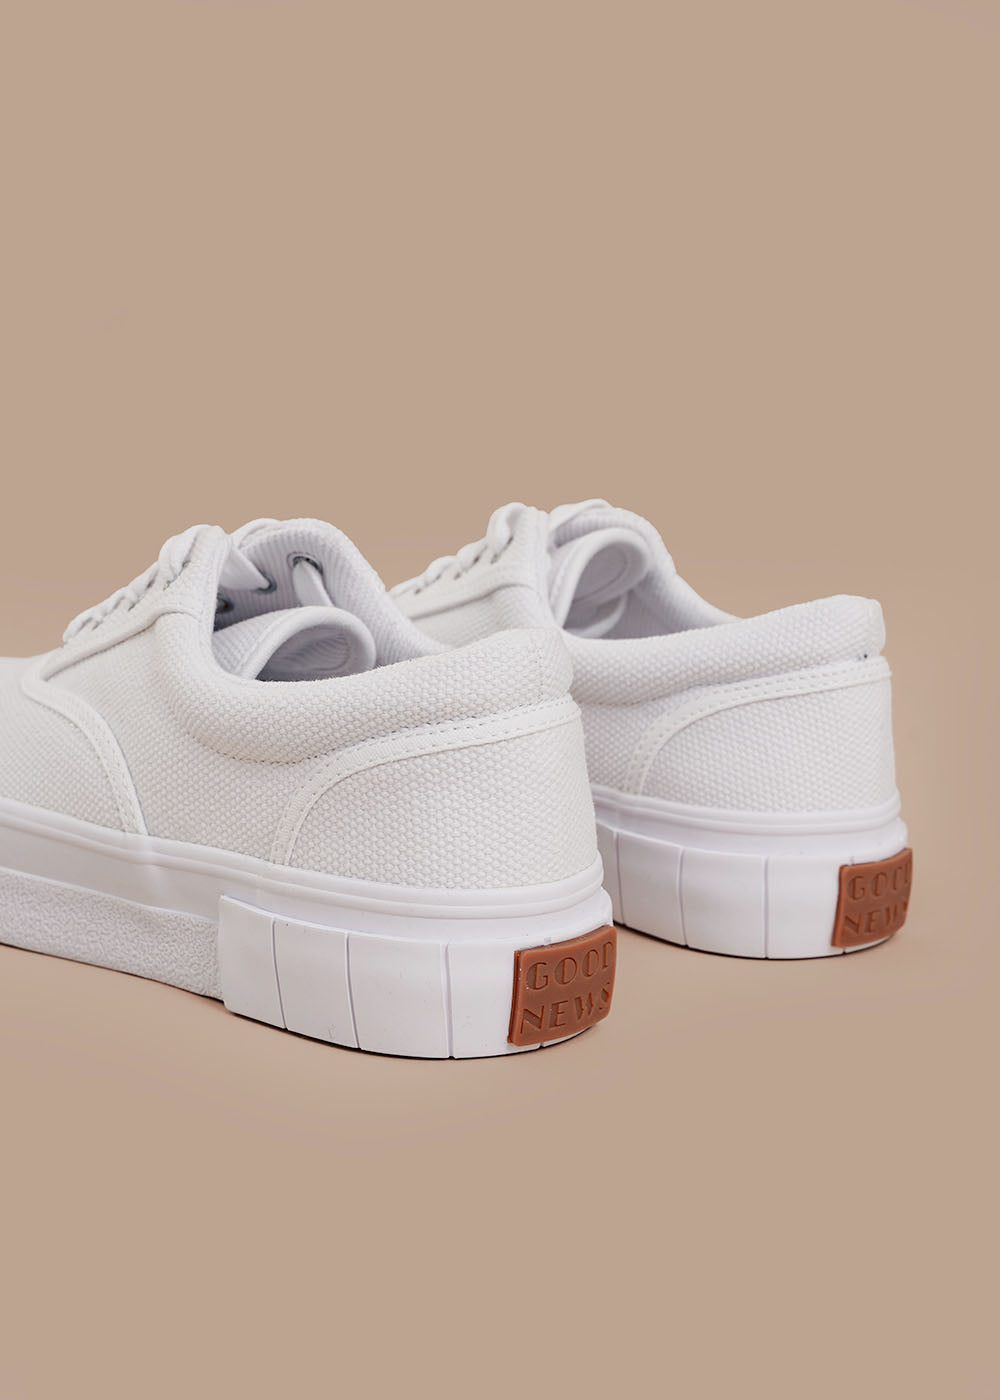 GOOD NEWS White Opal Core Sneakers - New Classics Studios Sustainable Ethical Fashion Canada